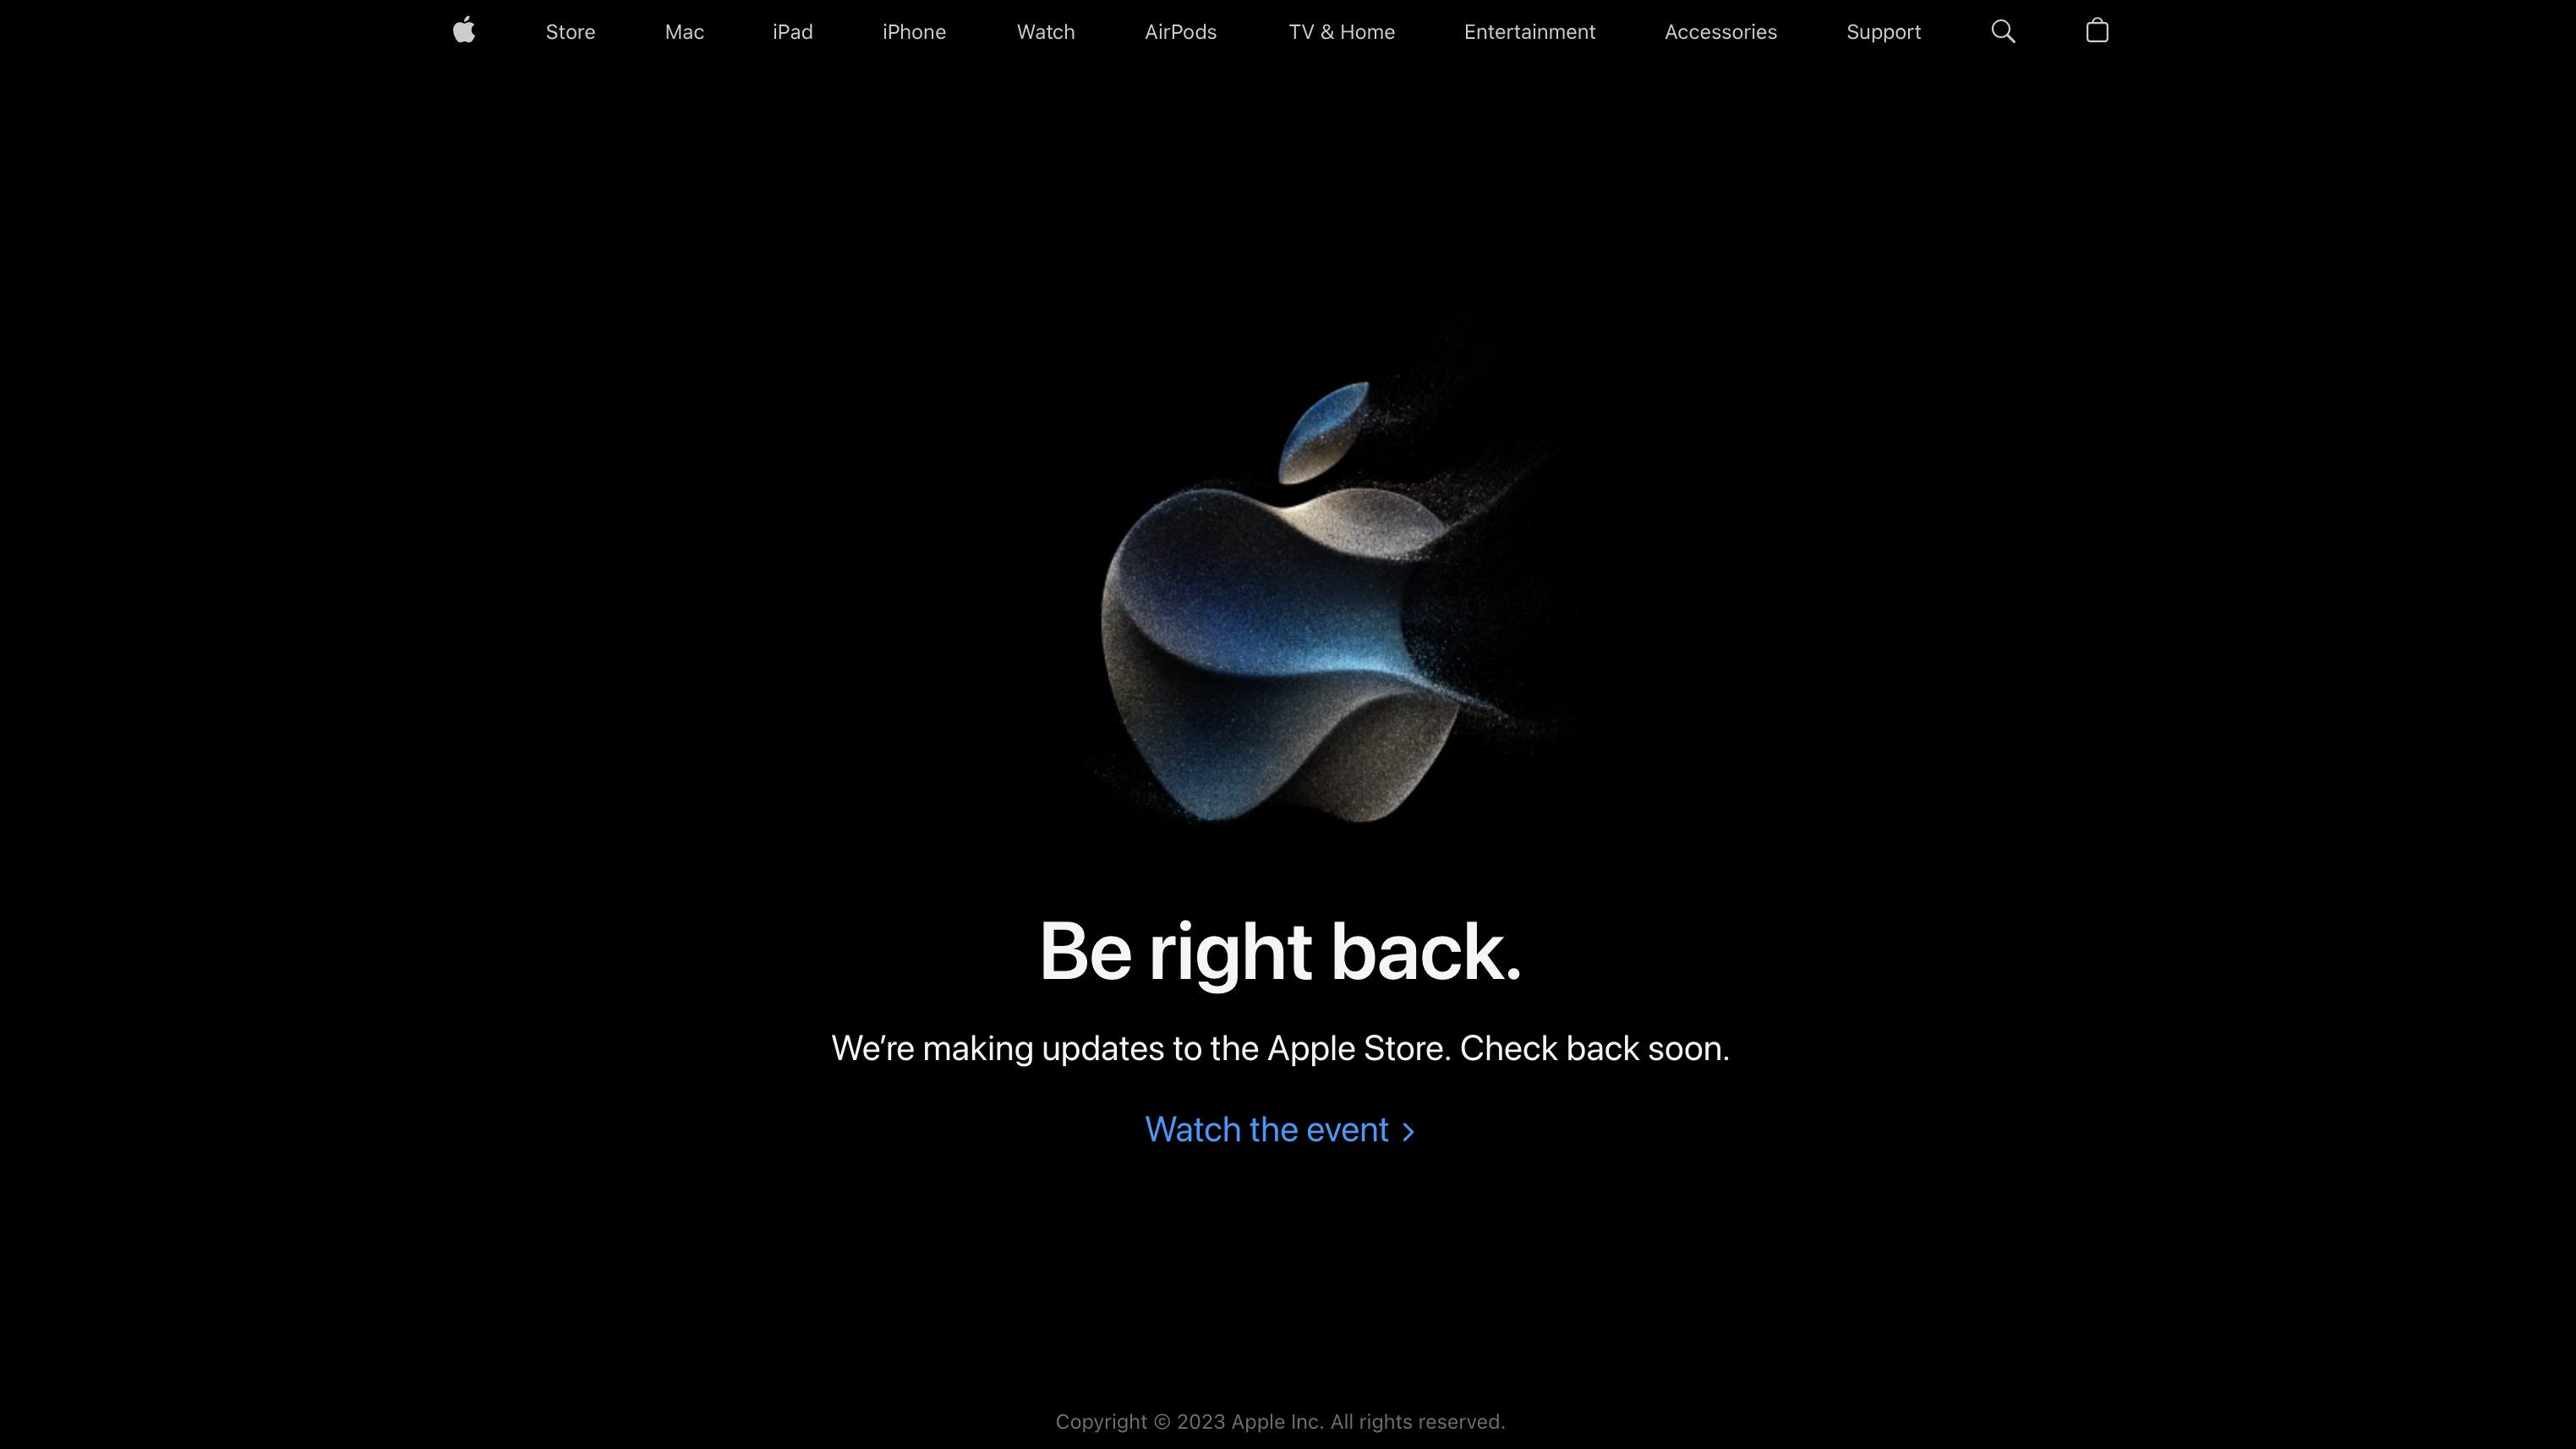 A screenshot of the Apple Store which is down ahead of the Wonderlust launch event